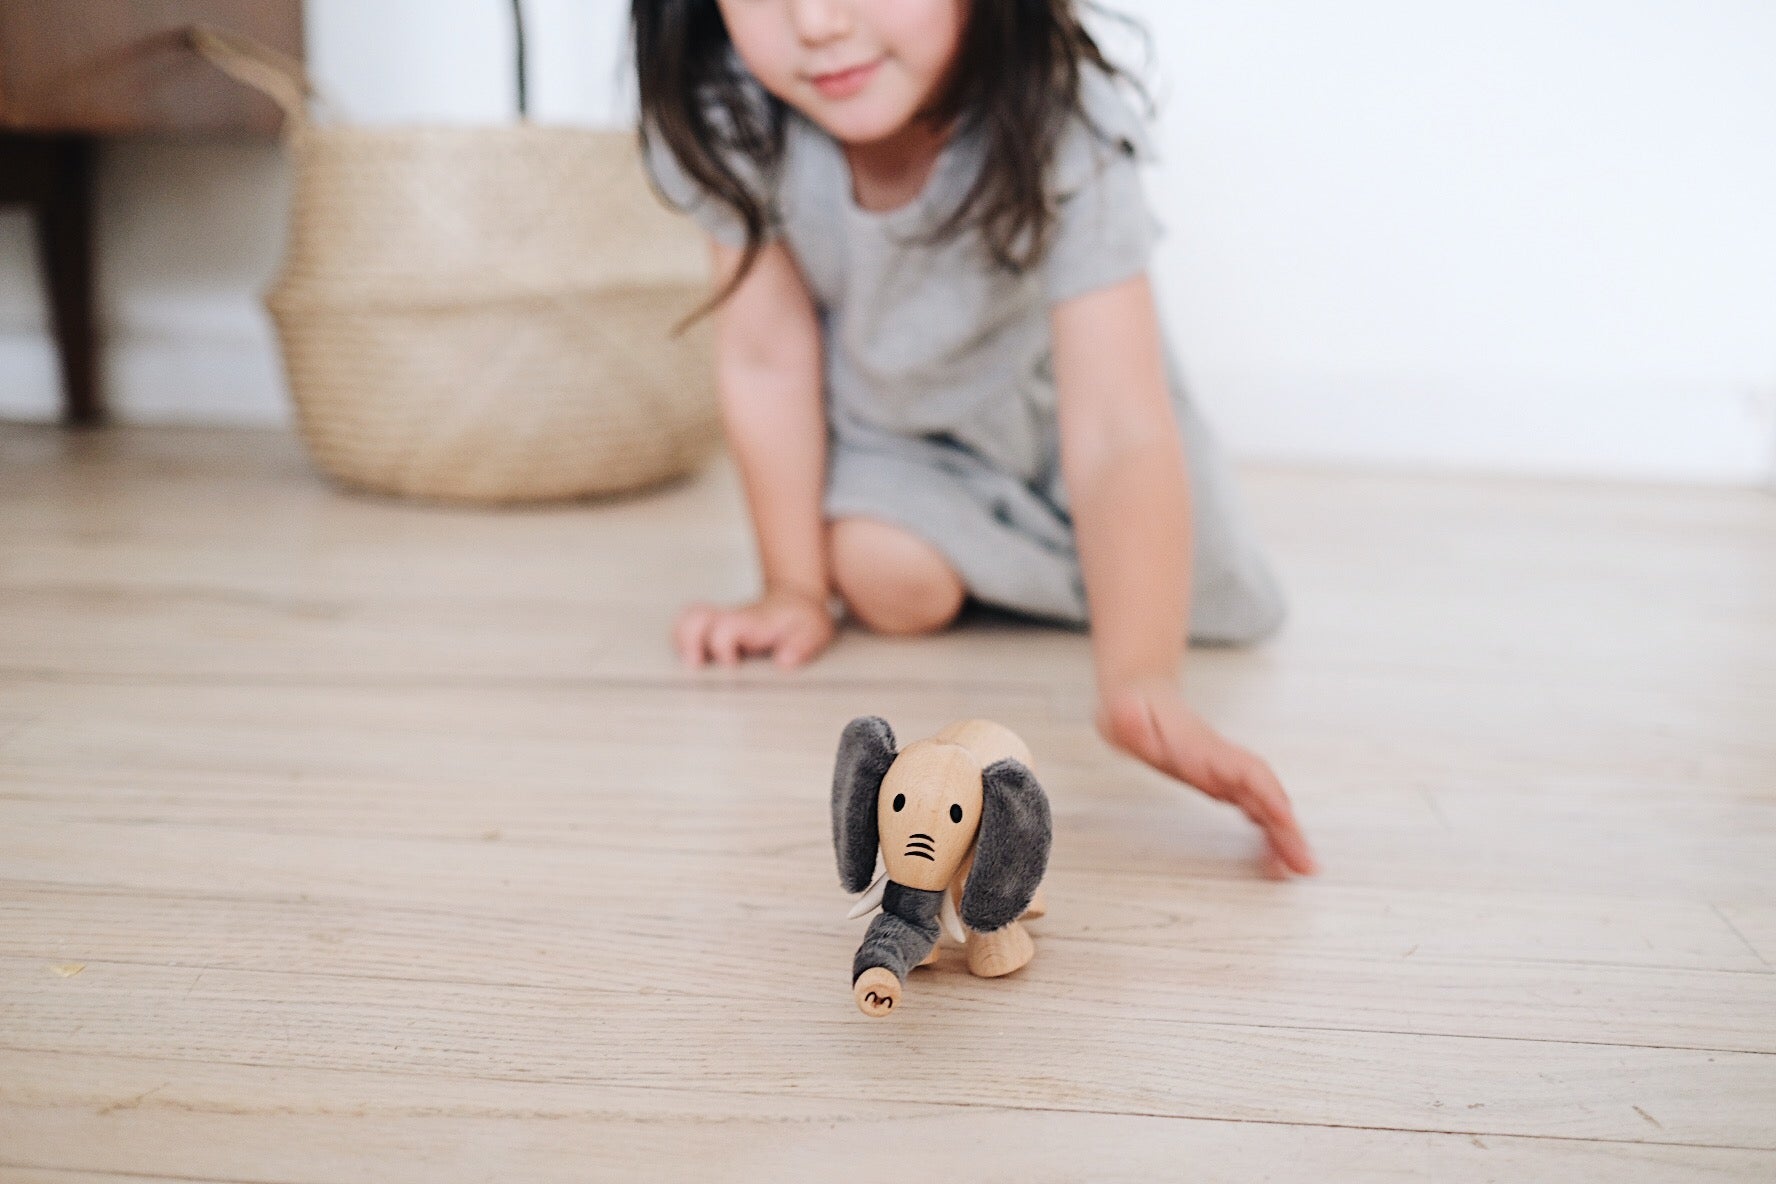 Meet your heart-stealing wonder! With smooth moves and flappy ears, she'll sweep you off your feet in a magical embrace. Perfect for imaginative play and learning adventures. Size: 9cm tall x 11cm long. Eco-friendly, durable, and safe for rough play.